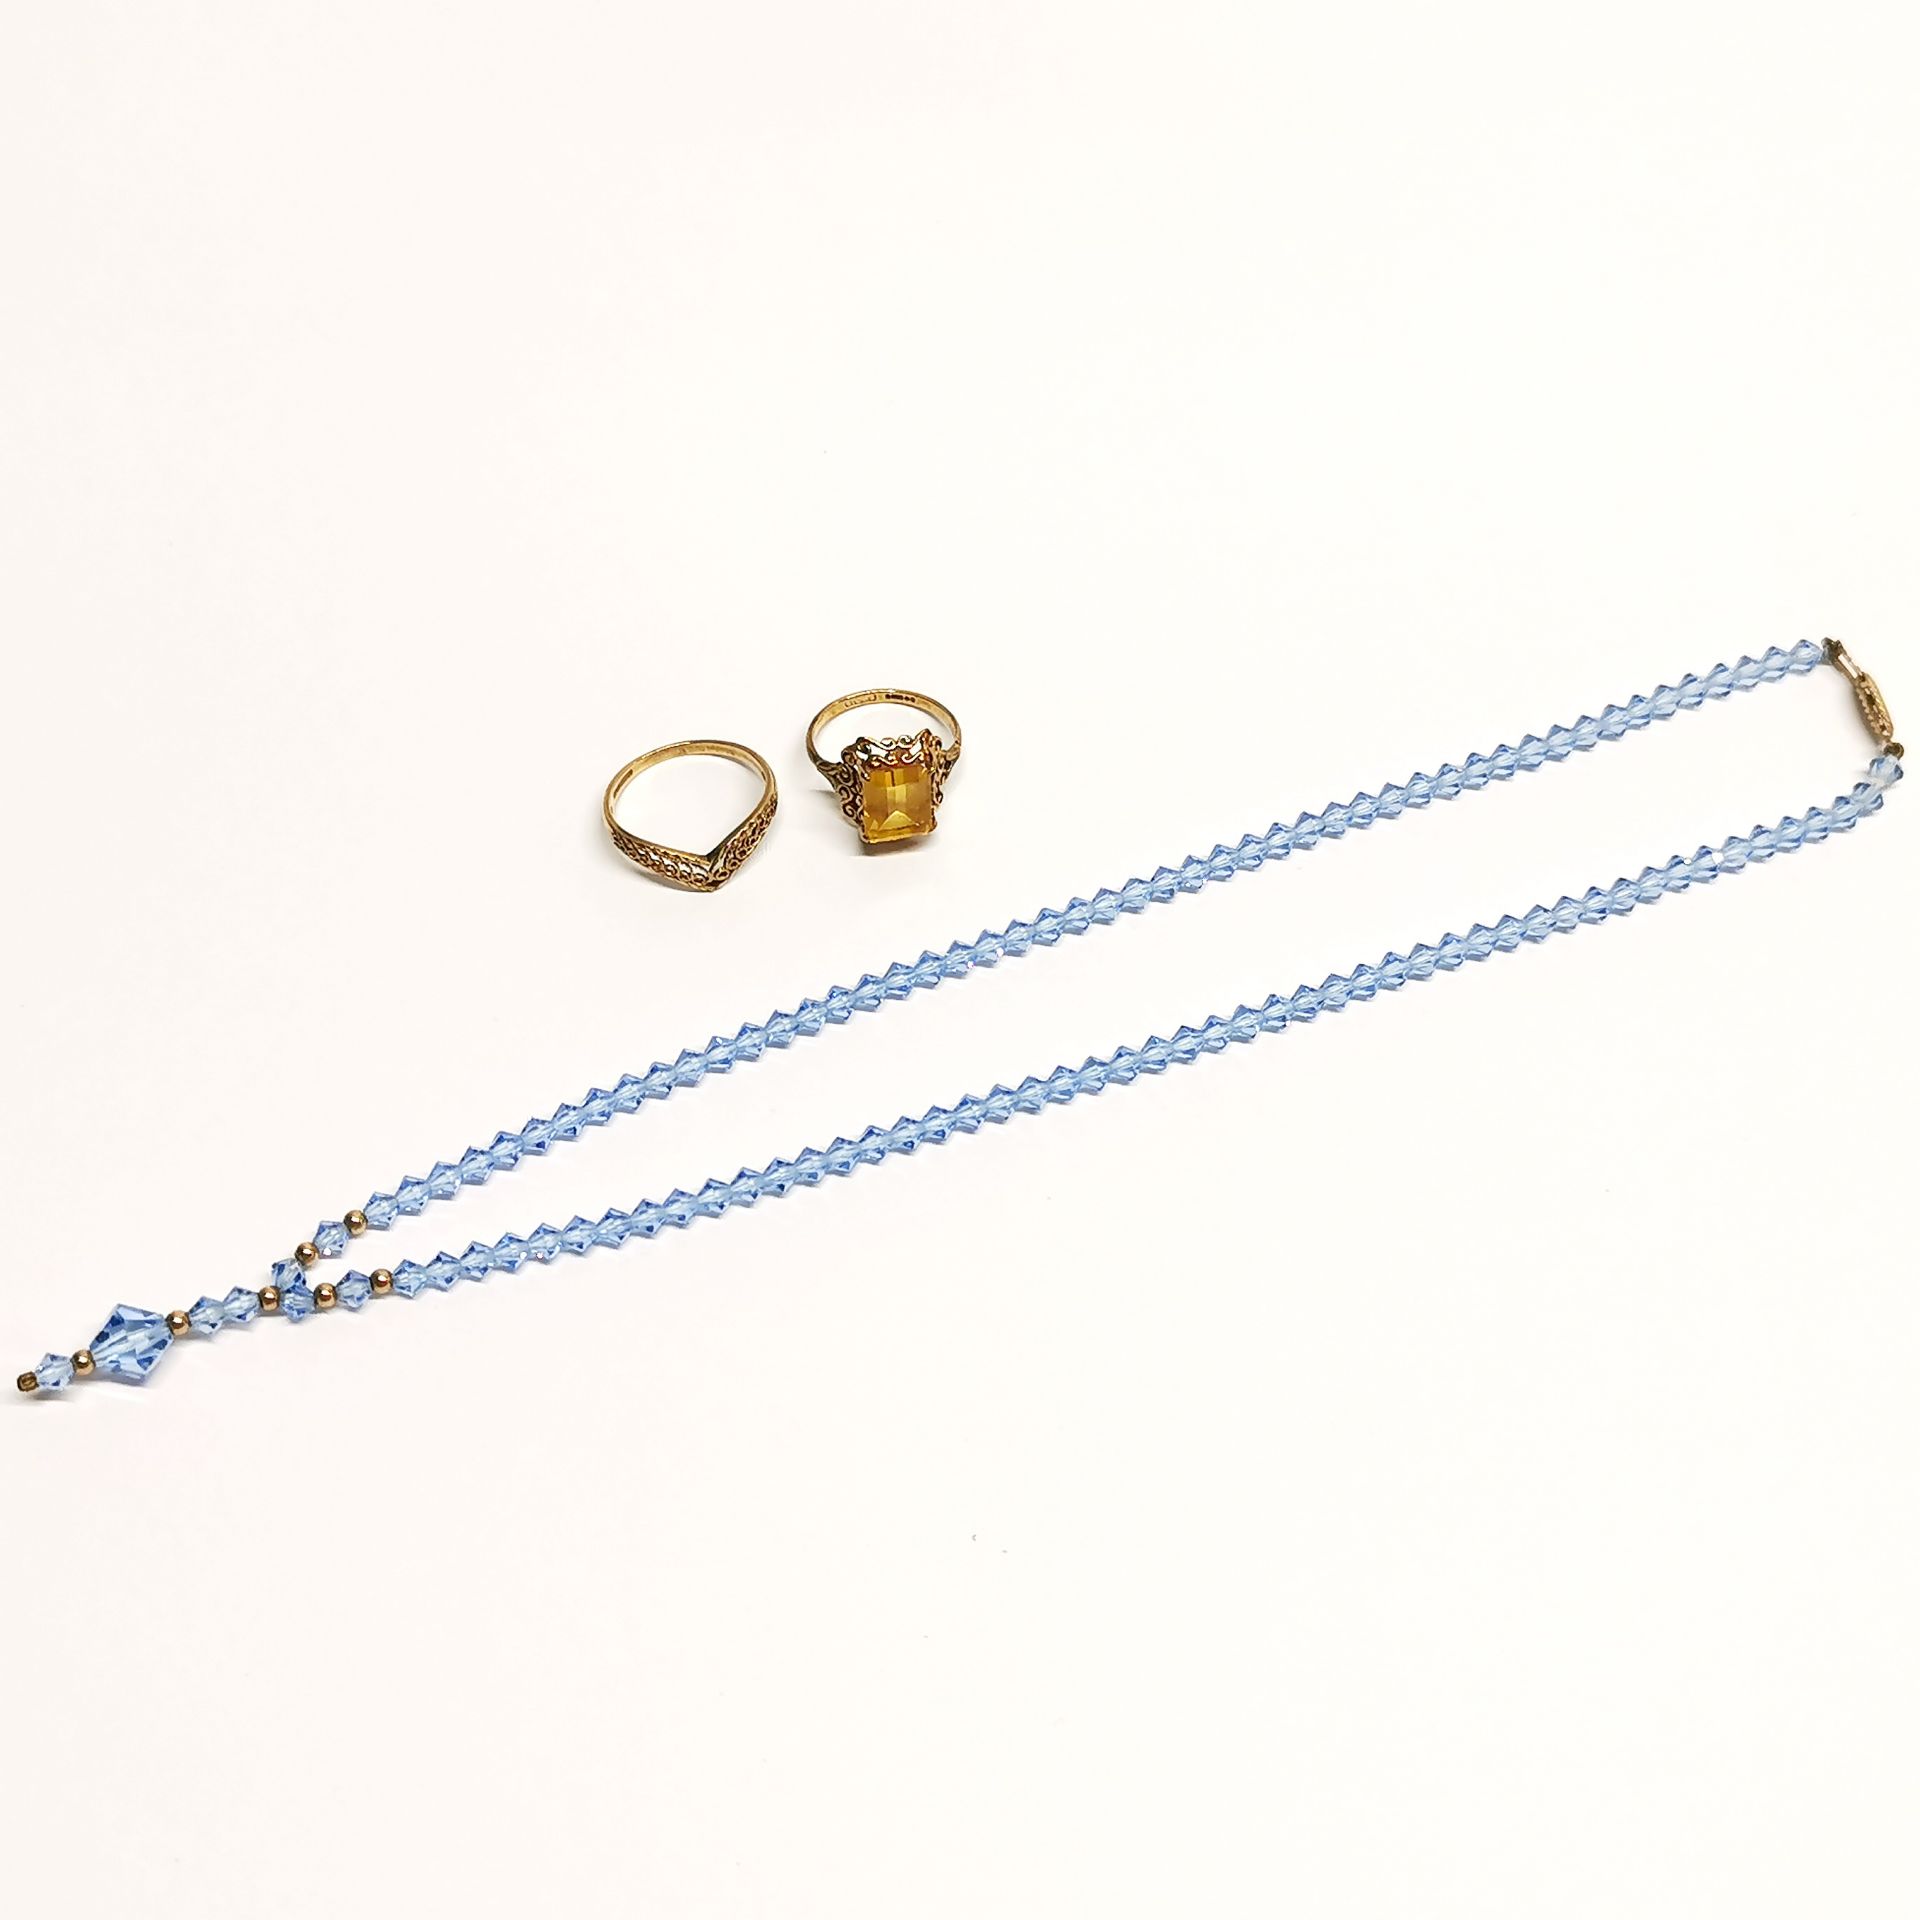 Two small 9ct gold rings and a 9ct gold crystal necklace.